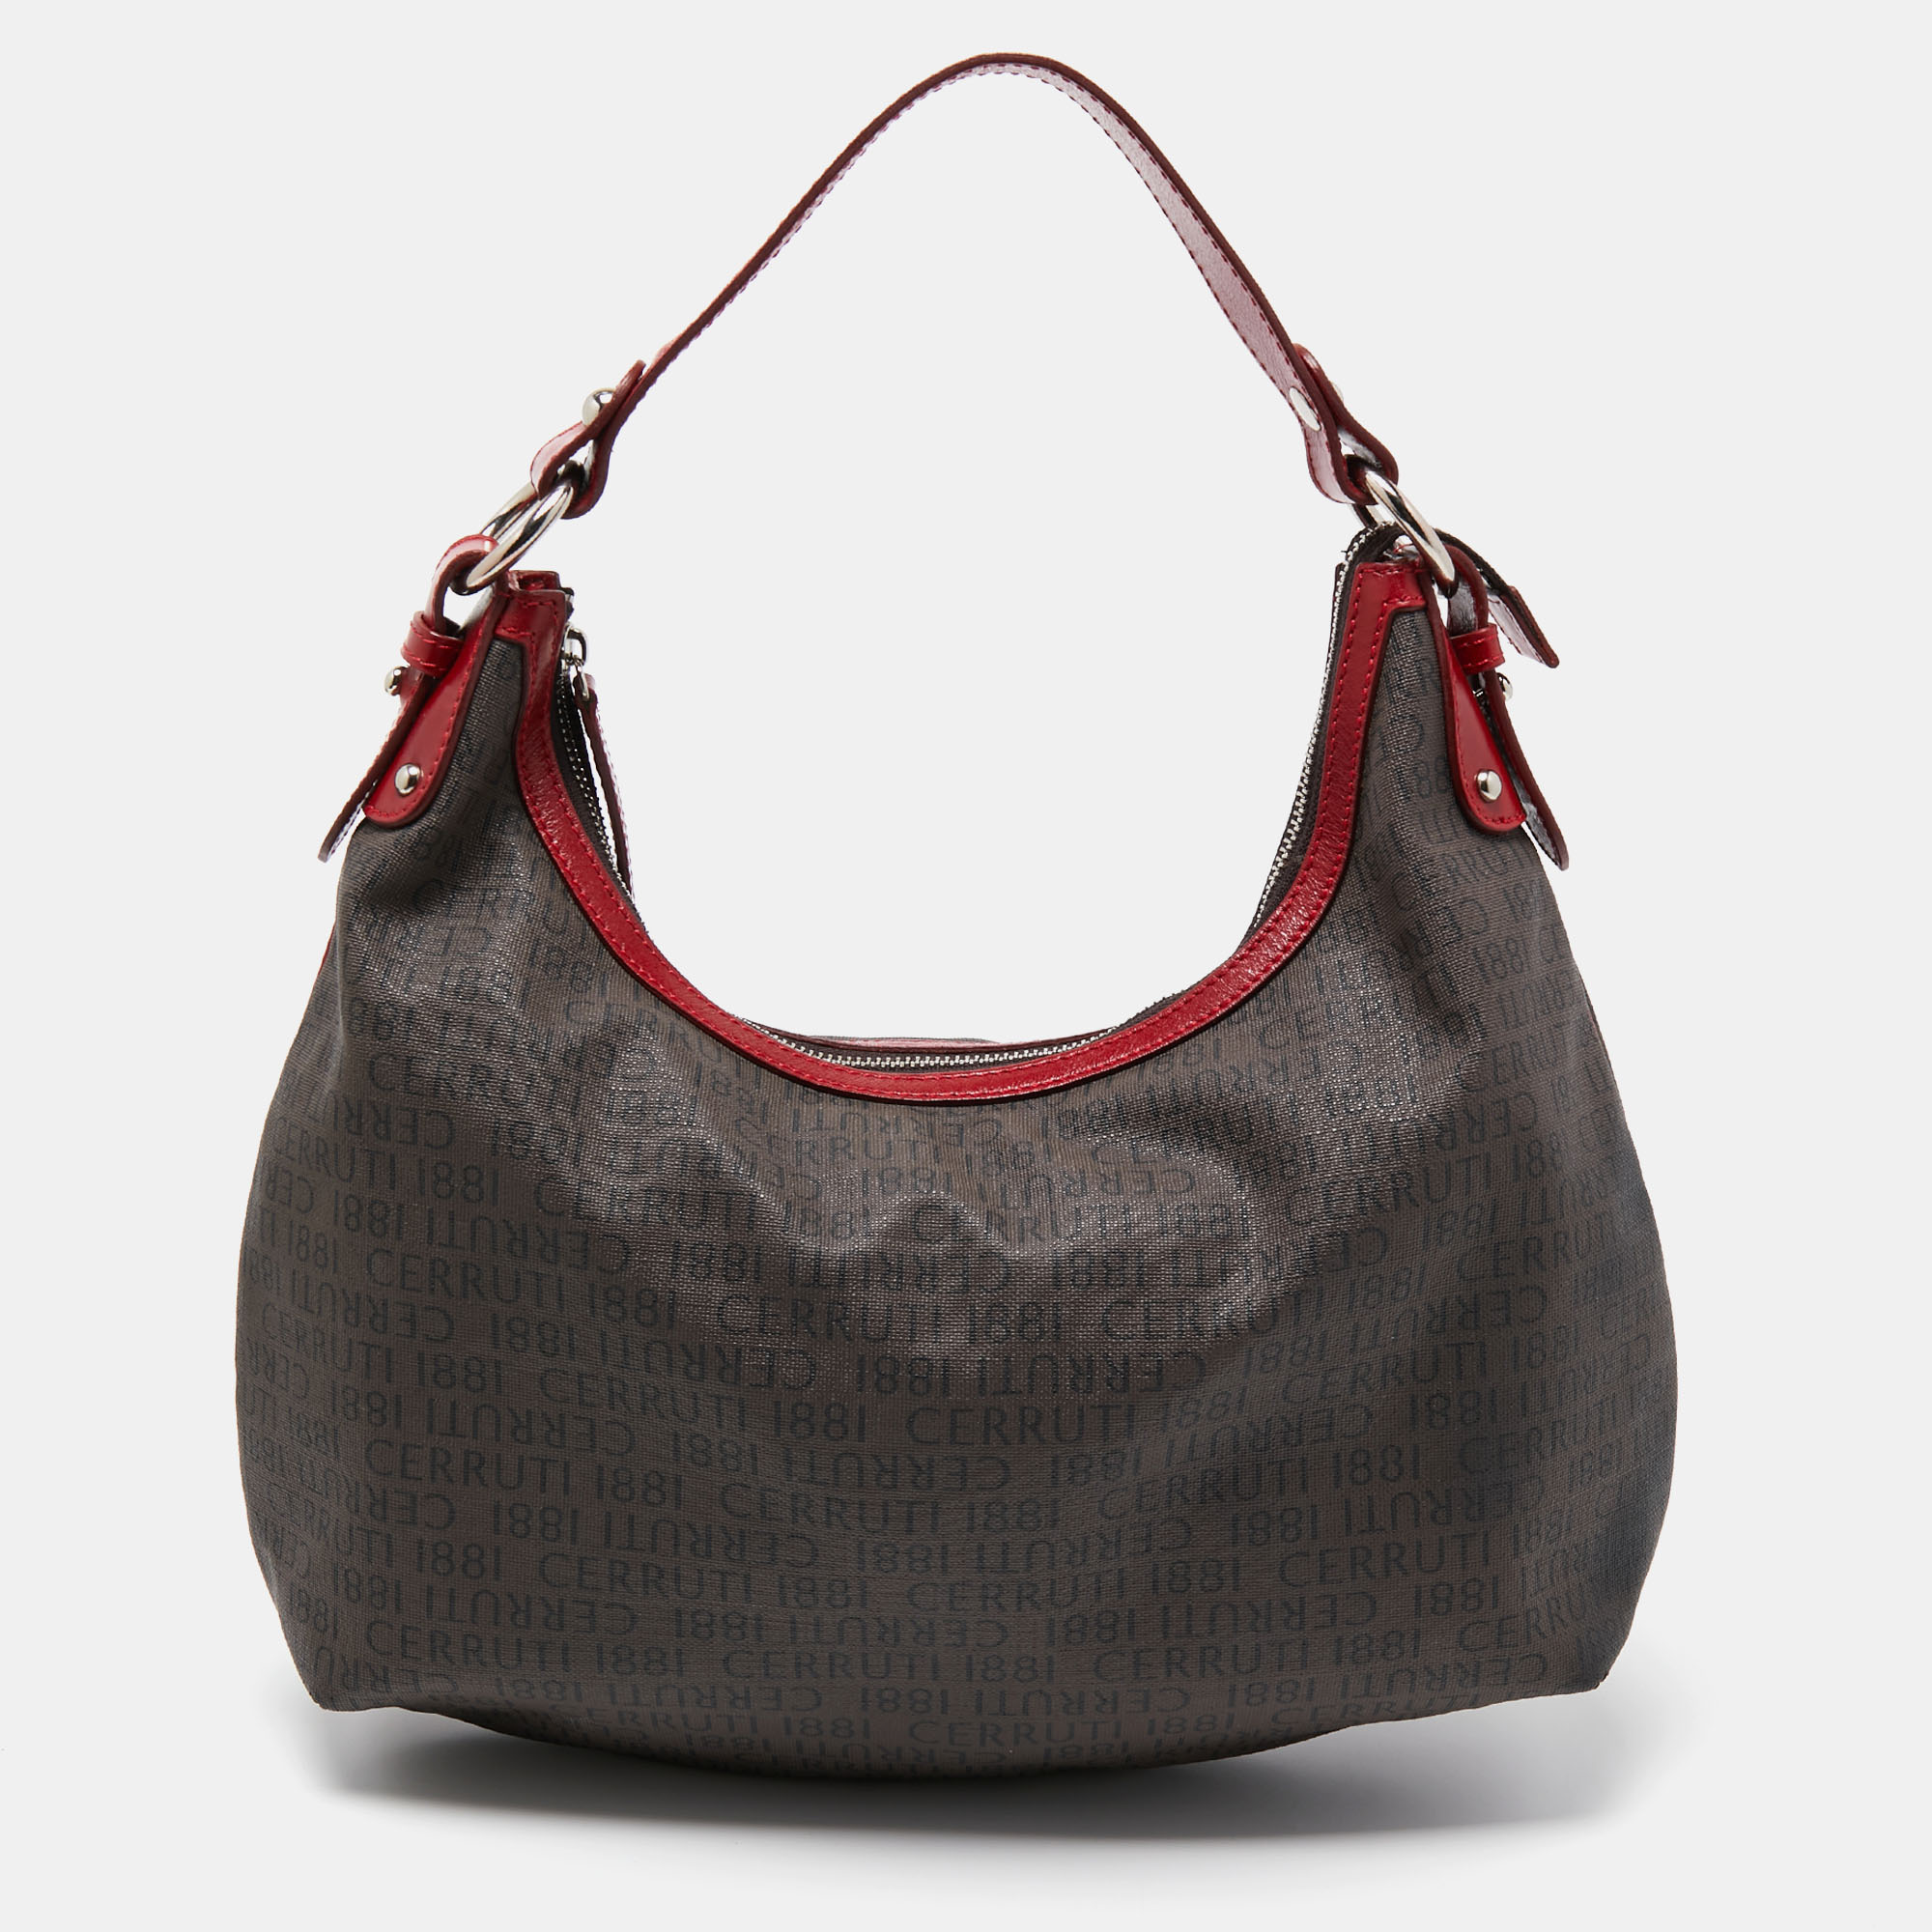 

Cerruti Dark Brown/Red Monogram Coated Canvas and Leather Hobo